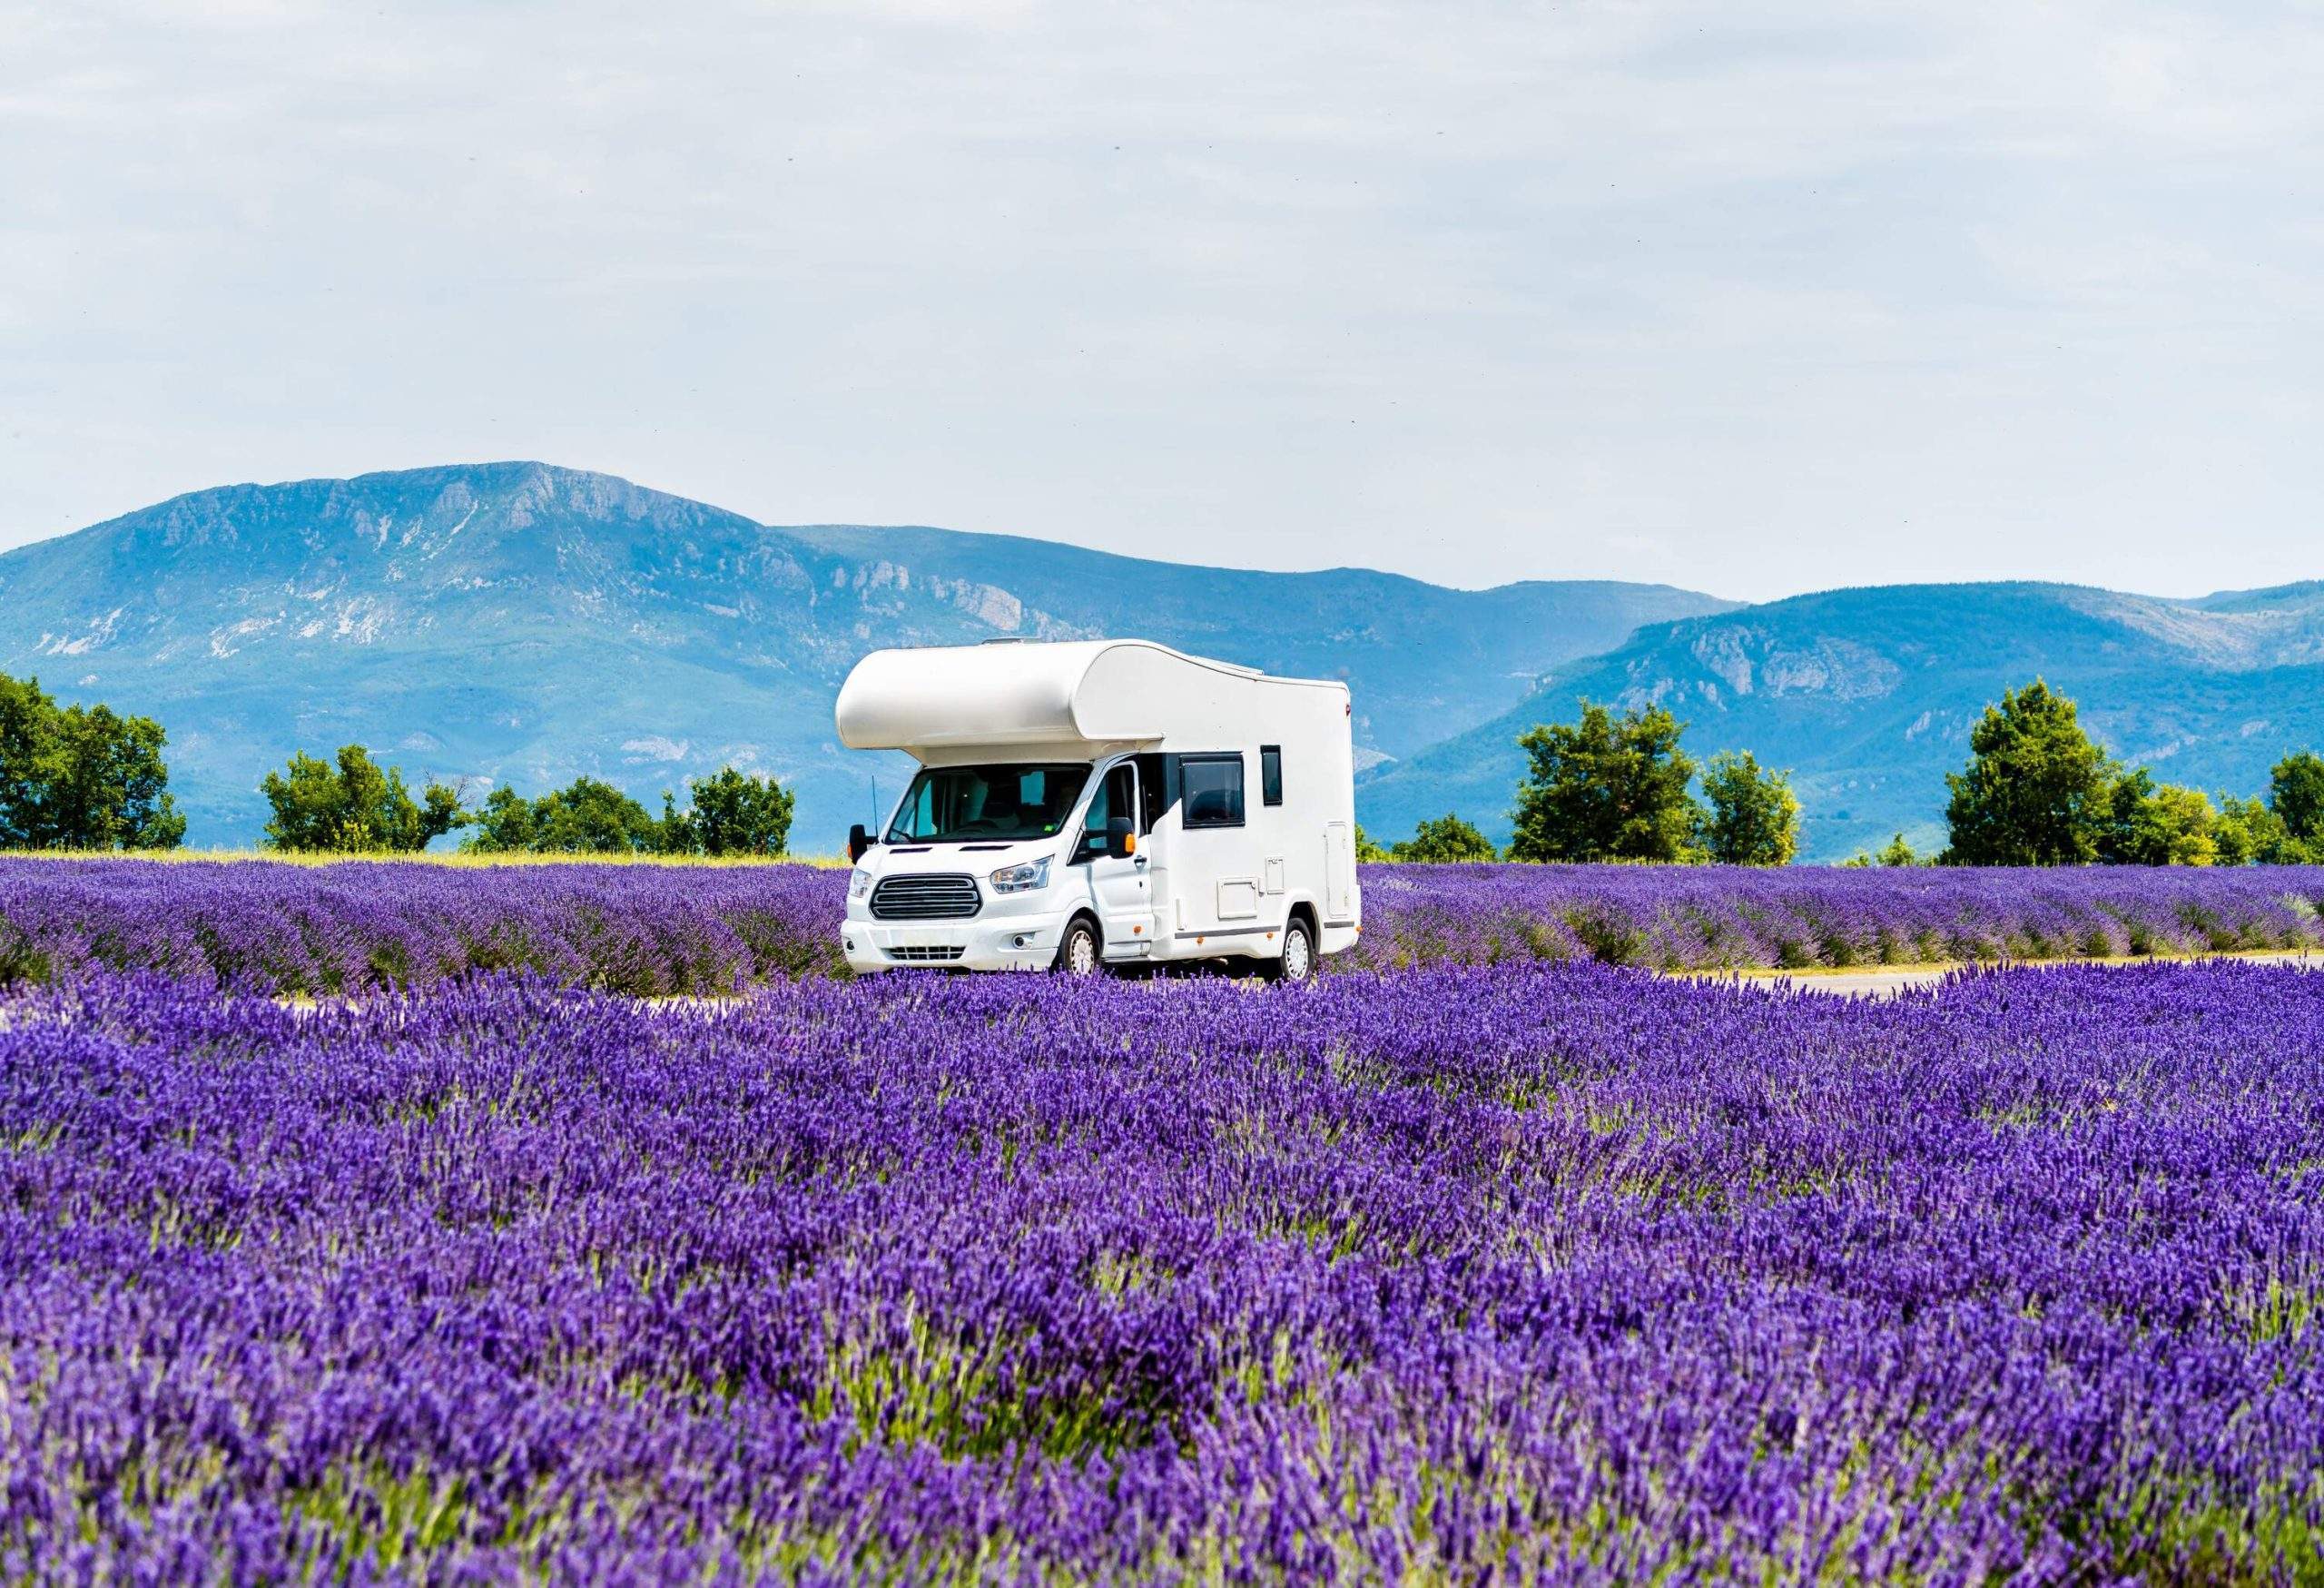 A campervan passing through a striking field of lavender.